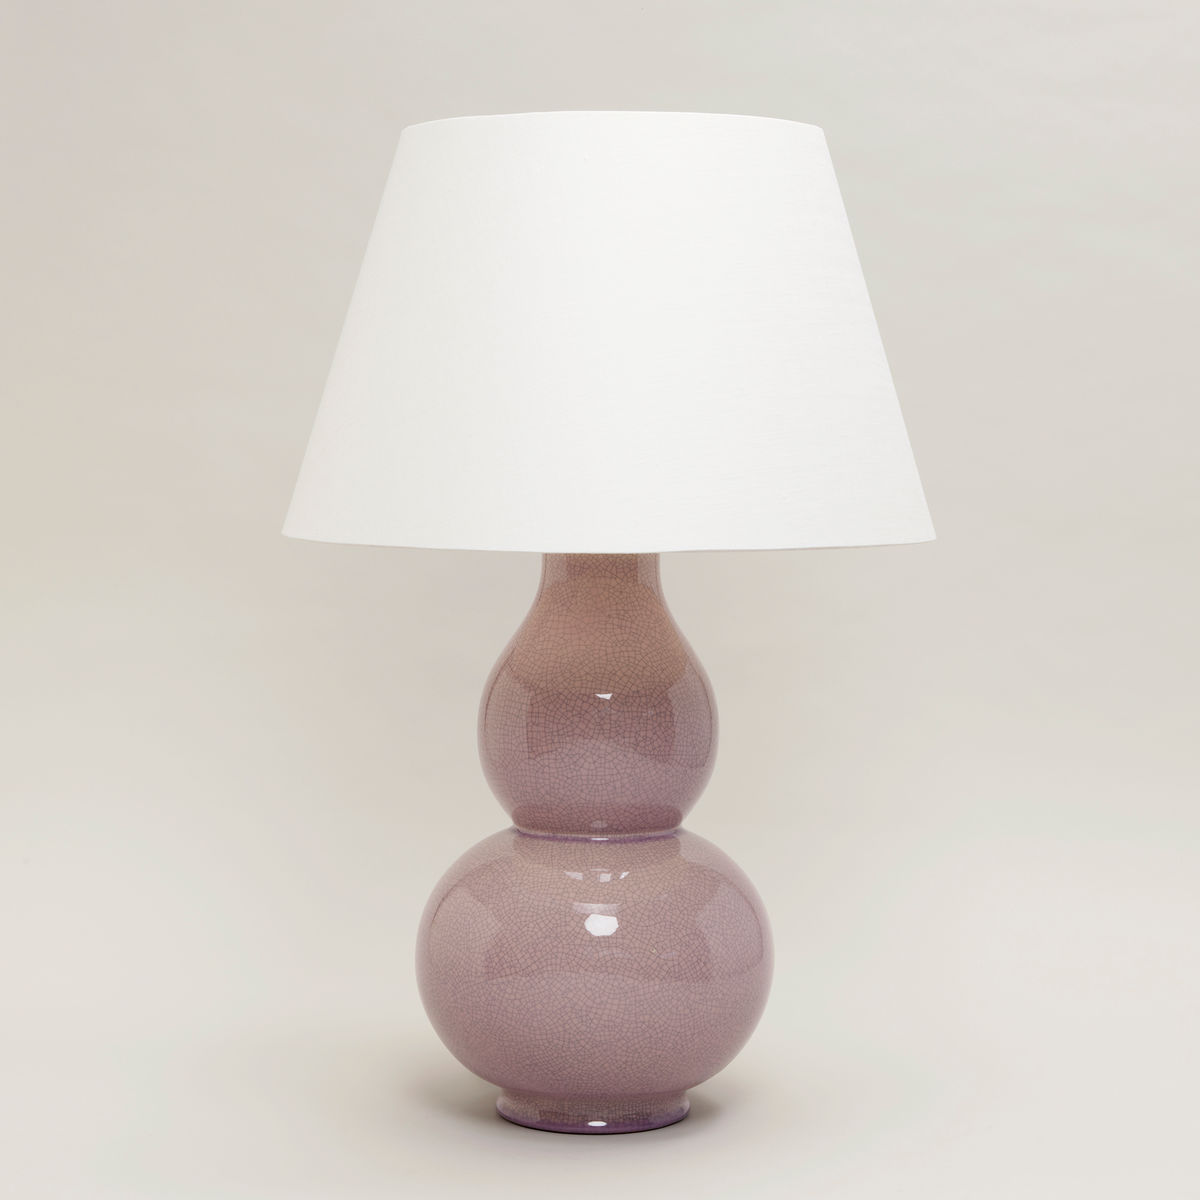 Gourd Shaped Vase Table Lamp in Crackled Dusky Rose Pink with Linen Laminated Lampshade